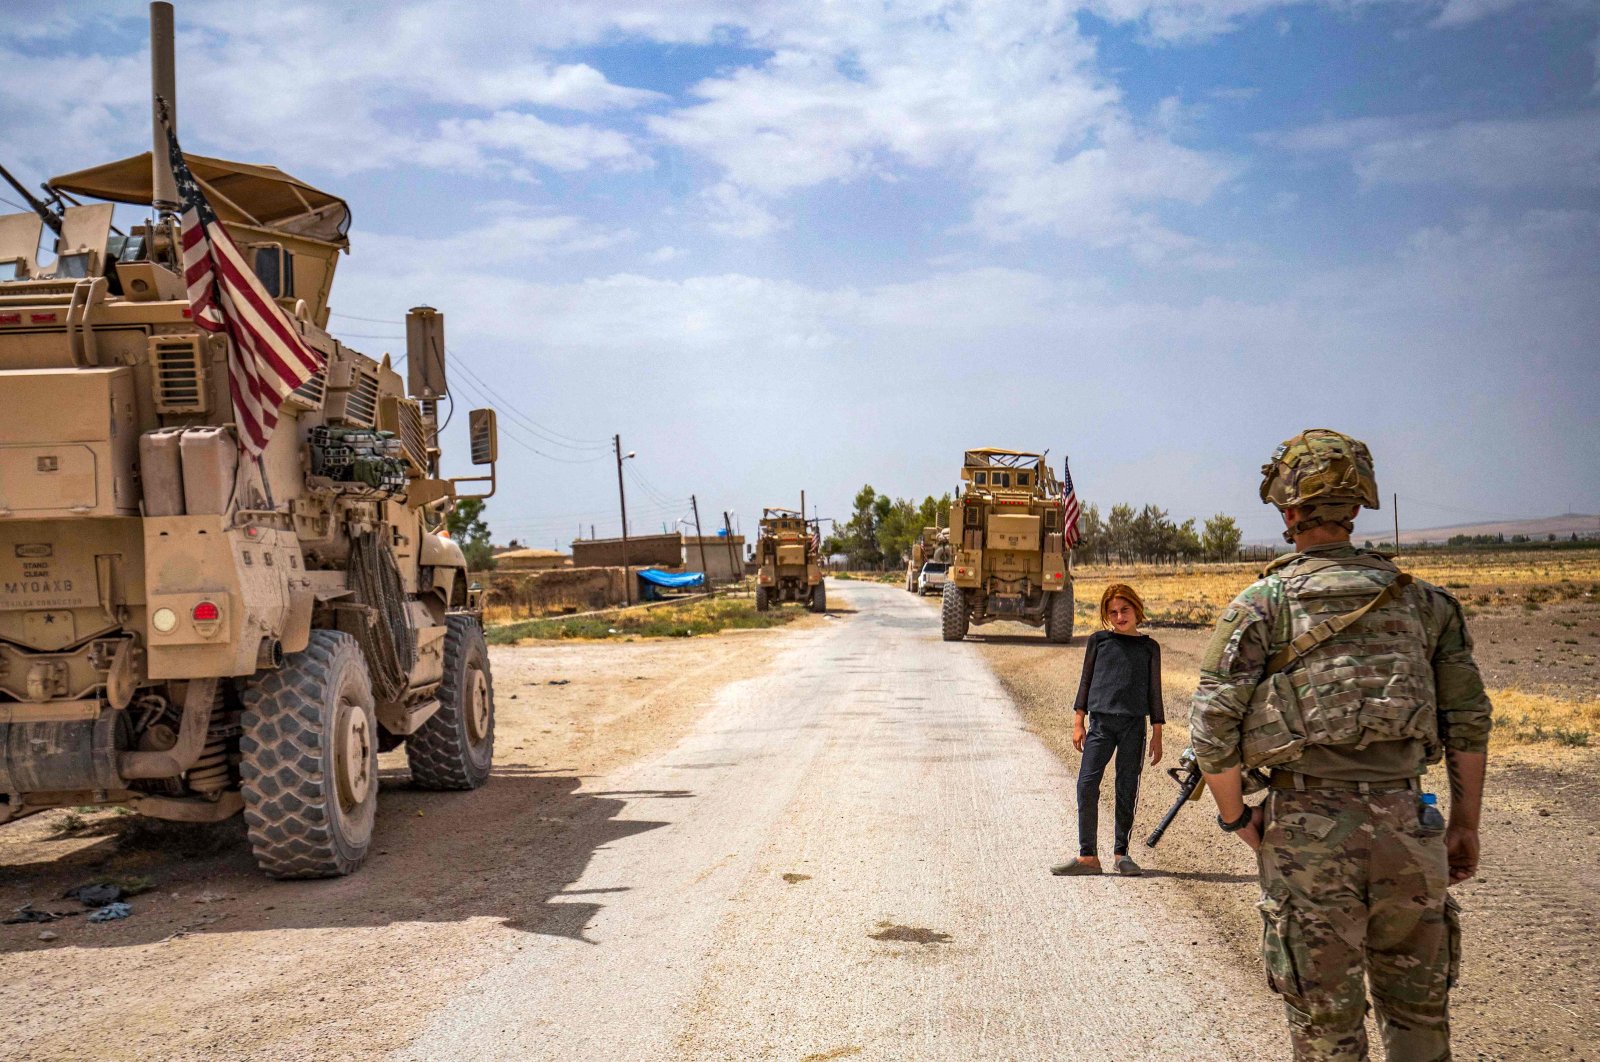 A U.S. soldier stands near a child during a patrol near the Syrian-Turkish border in one of the villages that was subject to bombardment the previous week in the countryside east of Qamishli, Hassakeh province, northeastern Syria, Aug. 21, 2022. (AFP Photo)